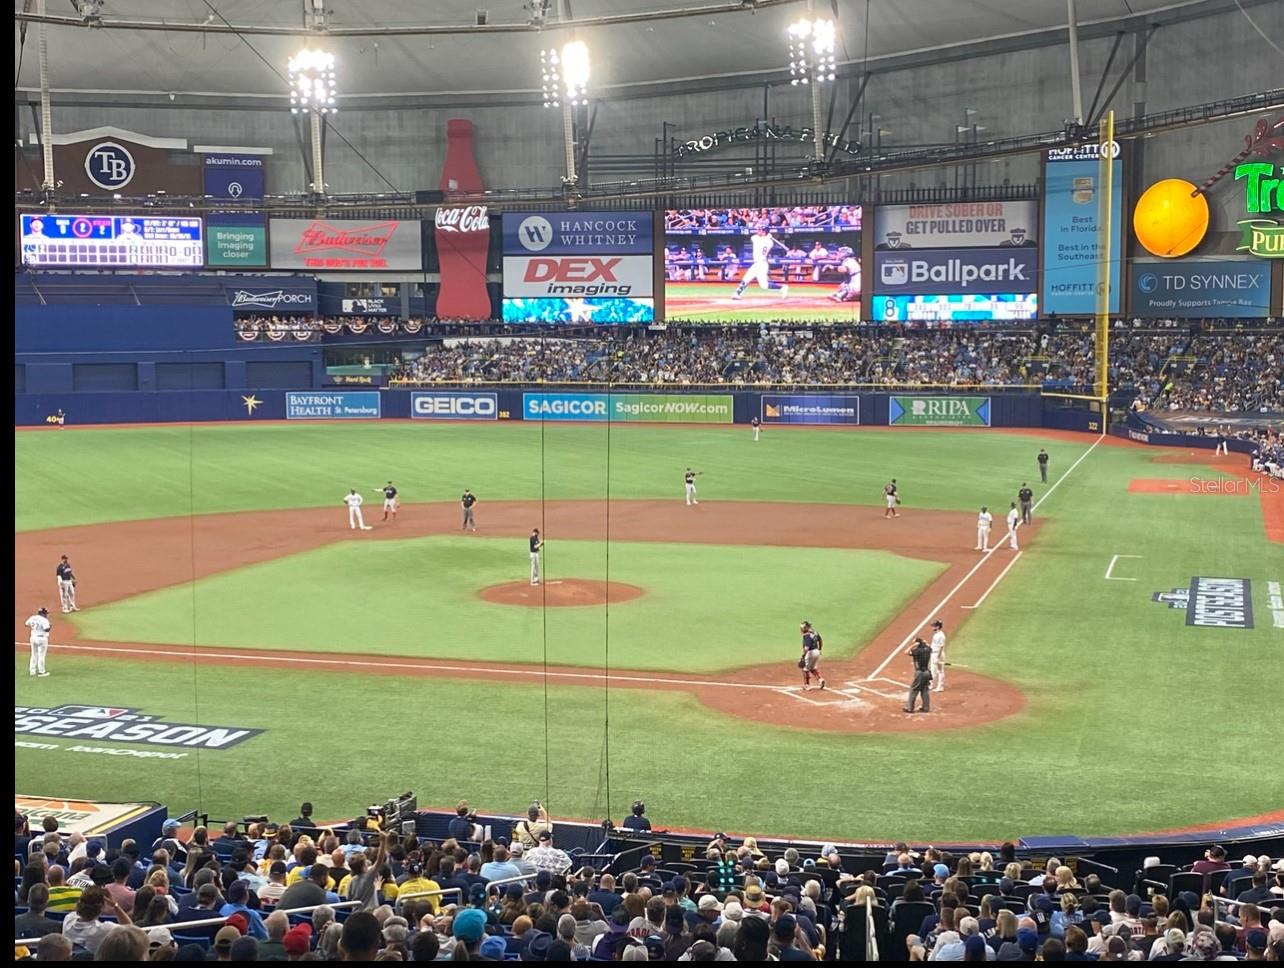 St Pete is home to the Tampa Bay Rays Baseball team and the Lightning Hockey team!